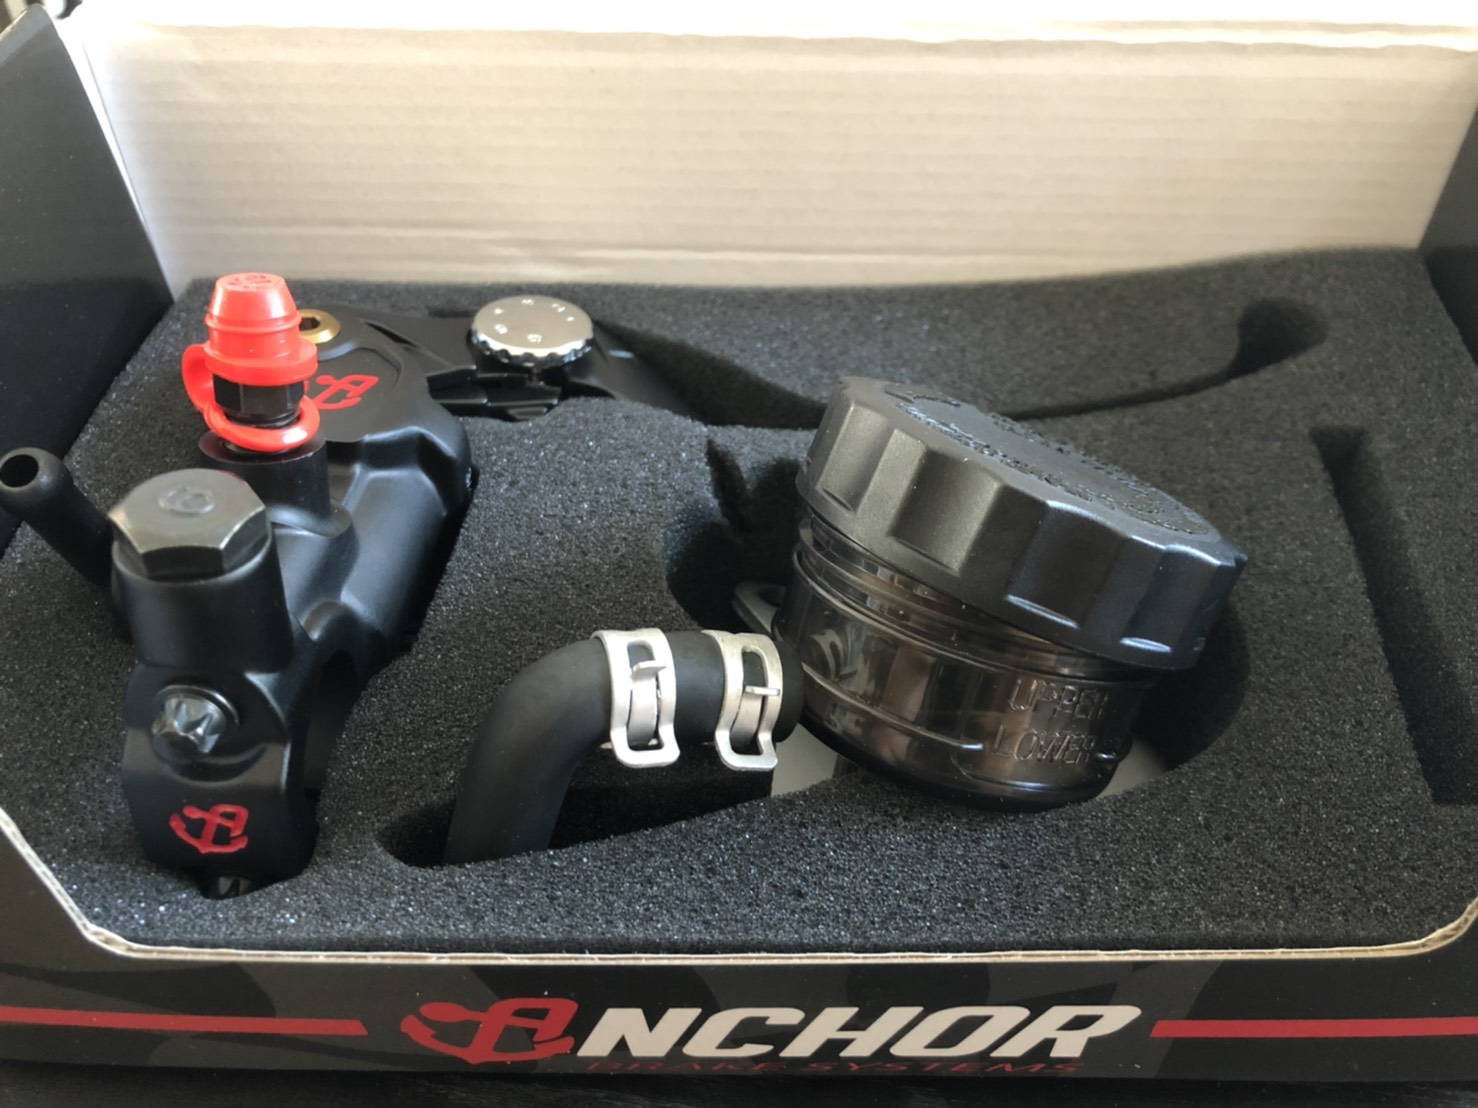 Anchor Brakes ANB1 / ANB7(Racing)- Better than stock master cylinder? (19mm Radial upgrade)